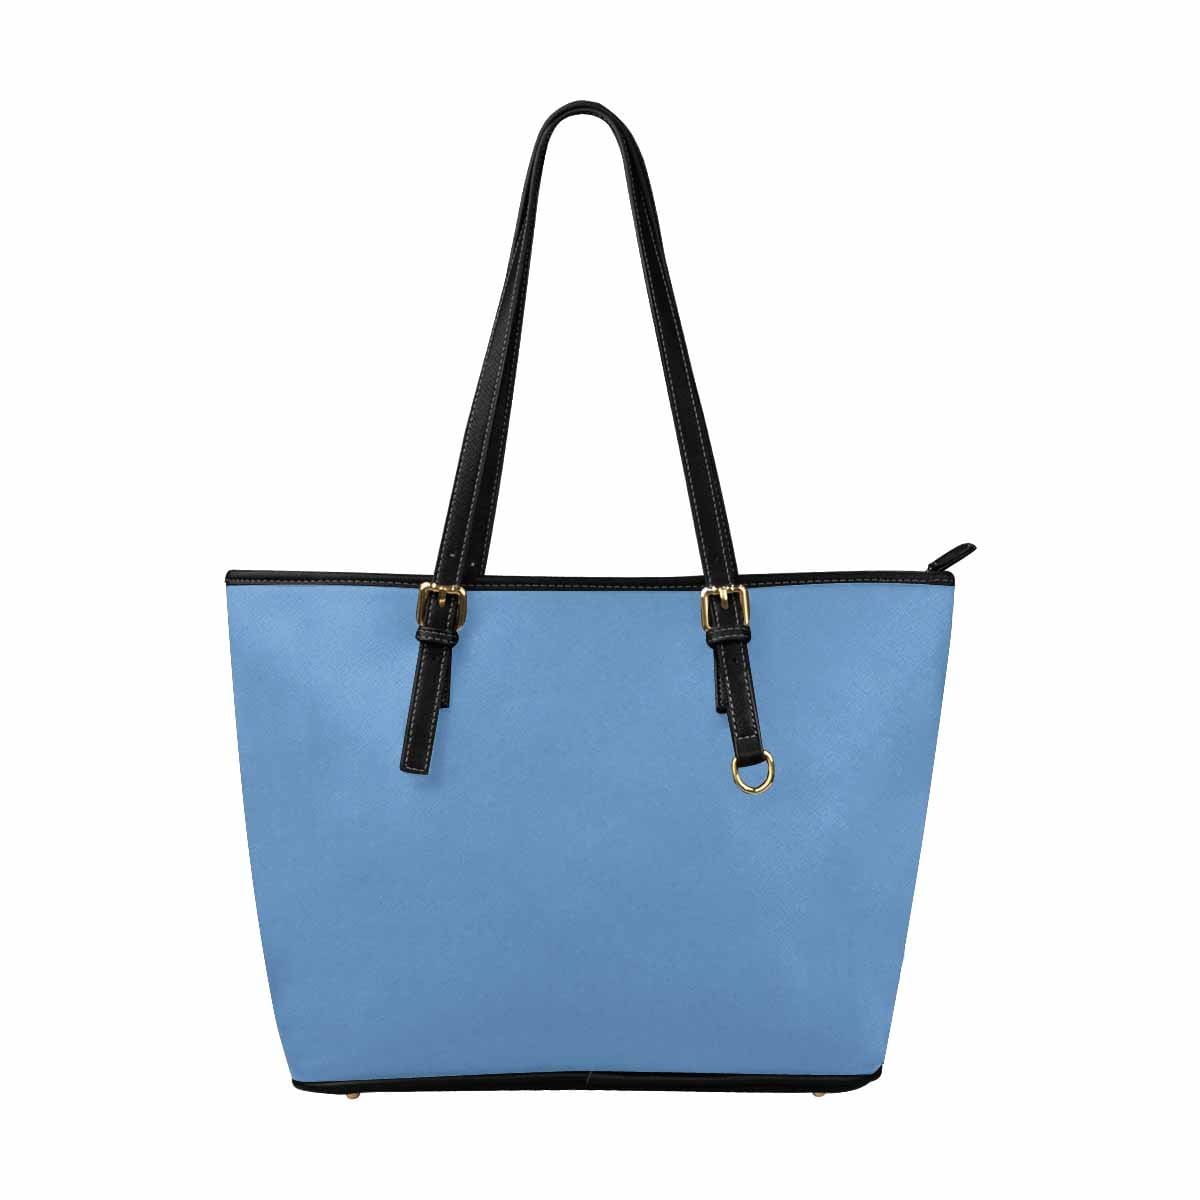 Large Leather Tote Shoulder Bag - Blue Gray - Bags | Leather Tote Bags